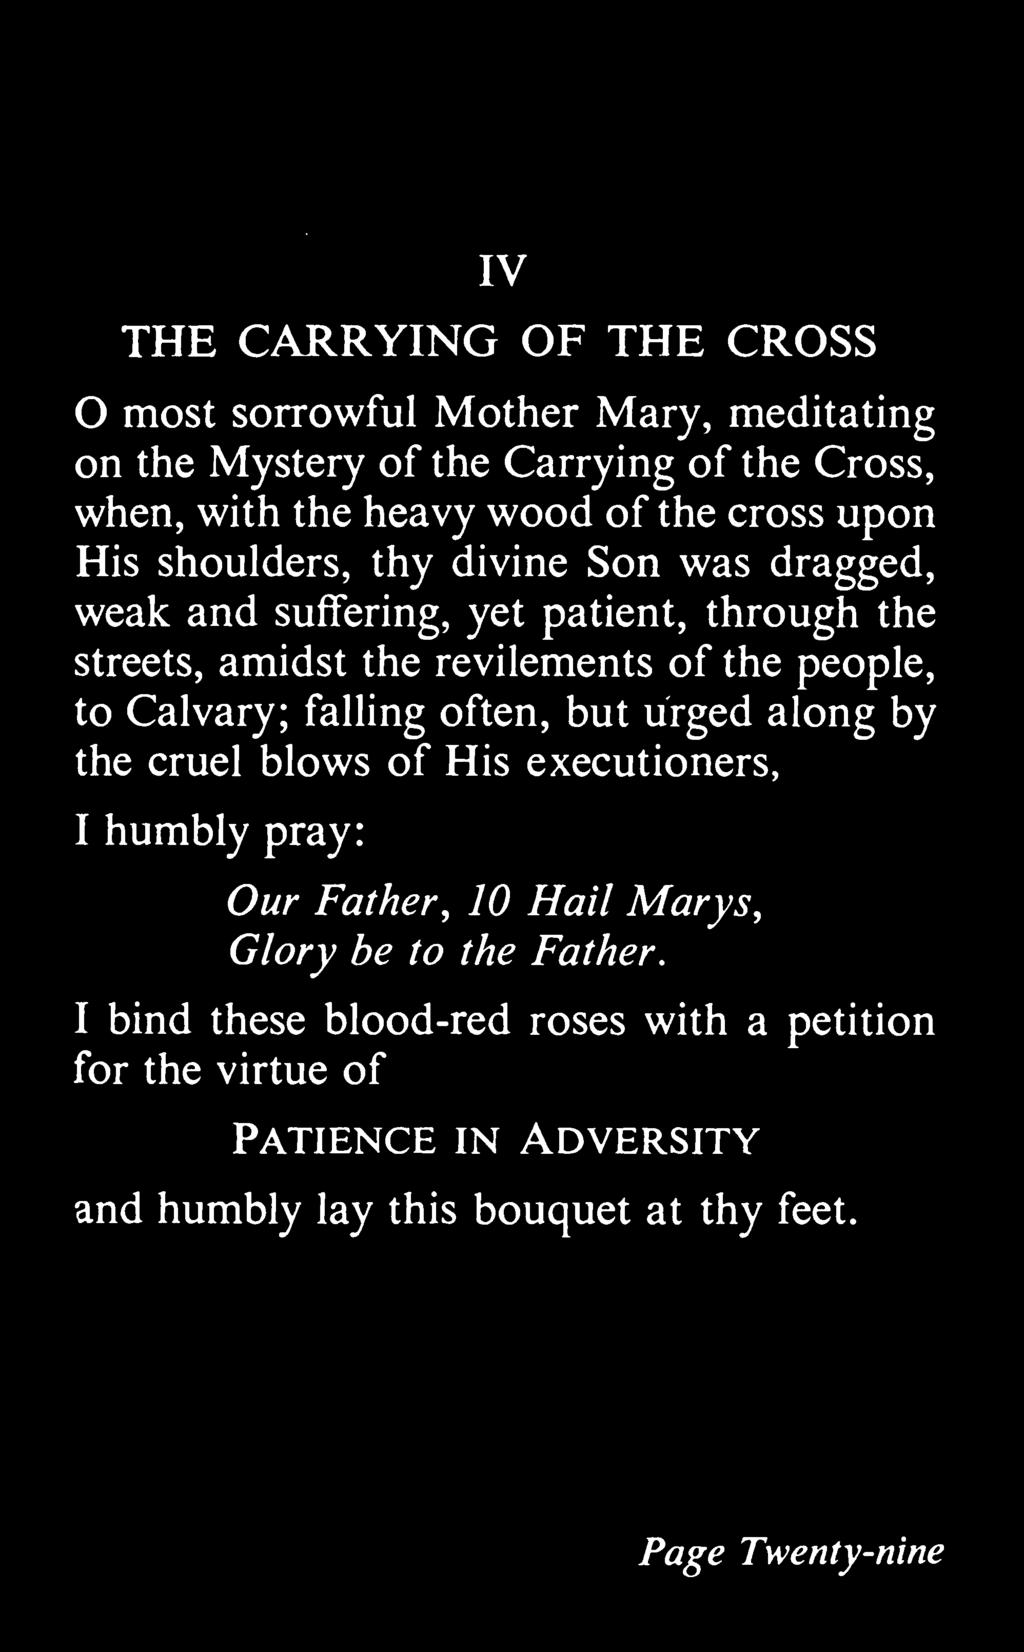 IV THE CARRYING OF THE CROSS most sorrowful Mother Mary, meditating on the Mystery of the Carrying of the Cross, when, with the heavy wood of the cross upon His shoulders, thy divine Son was dragged,